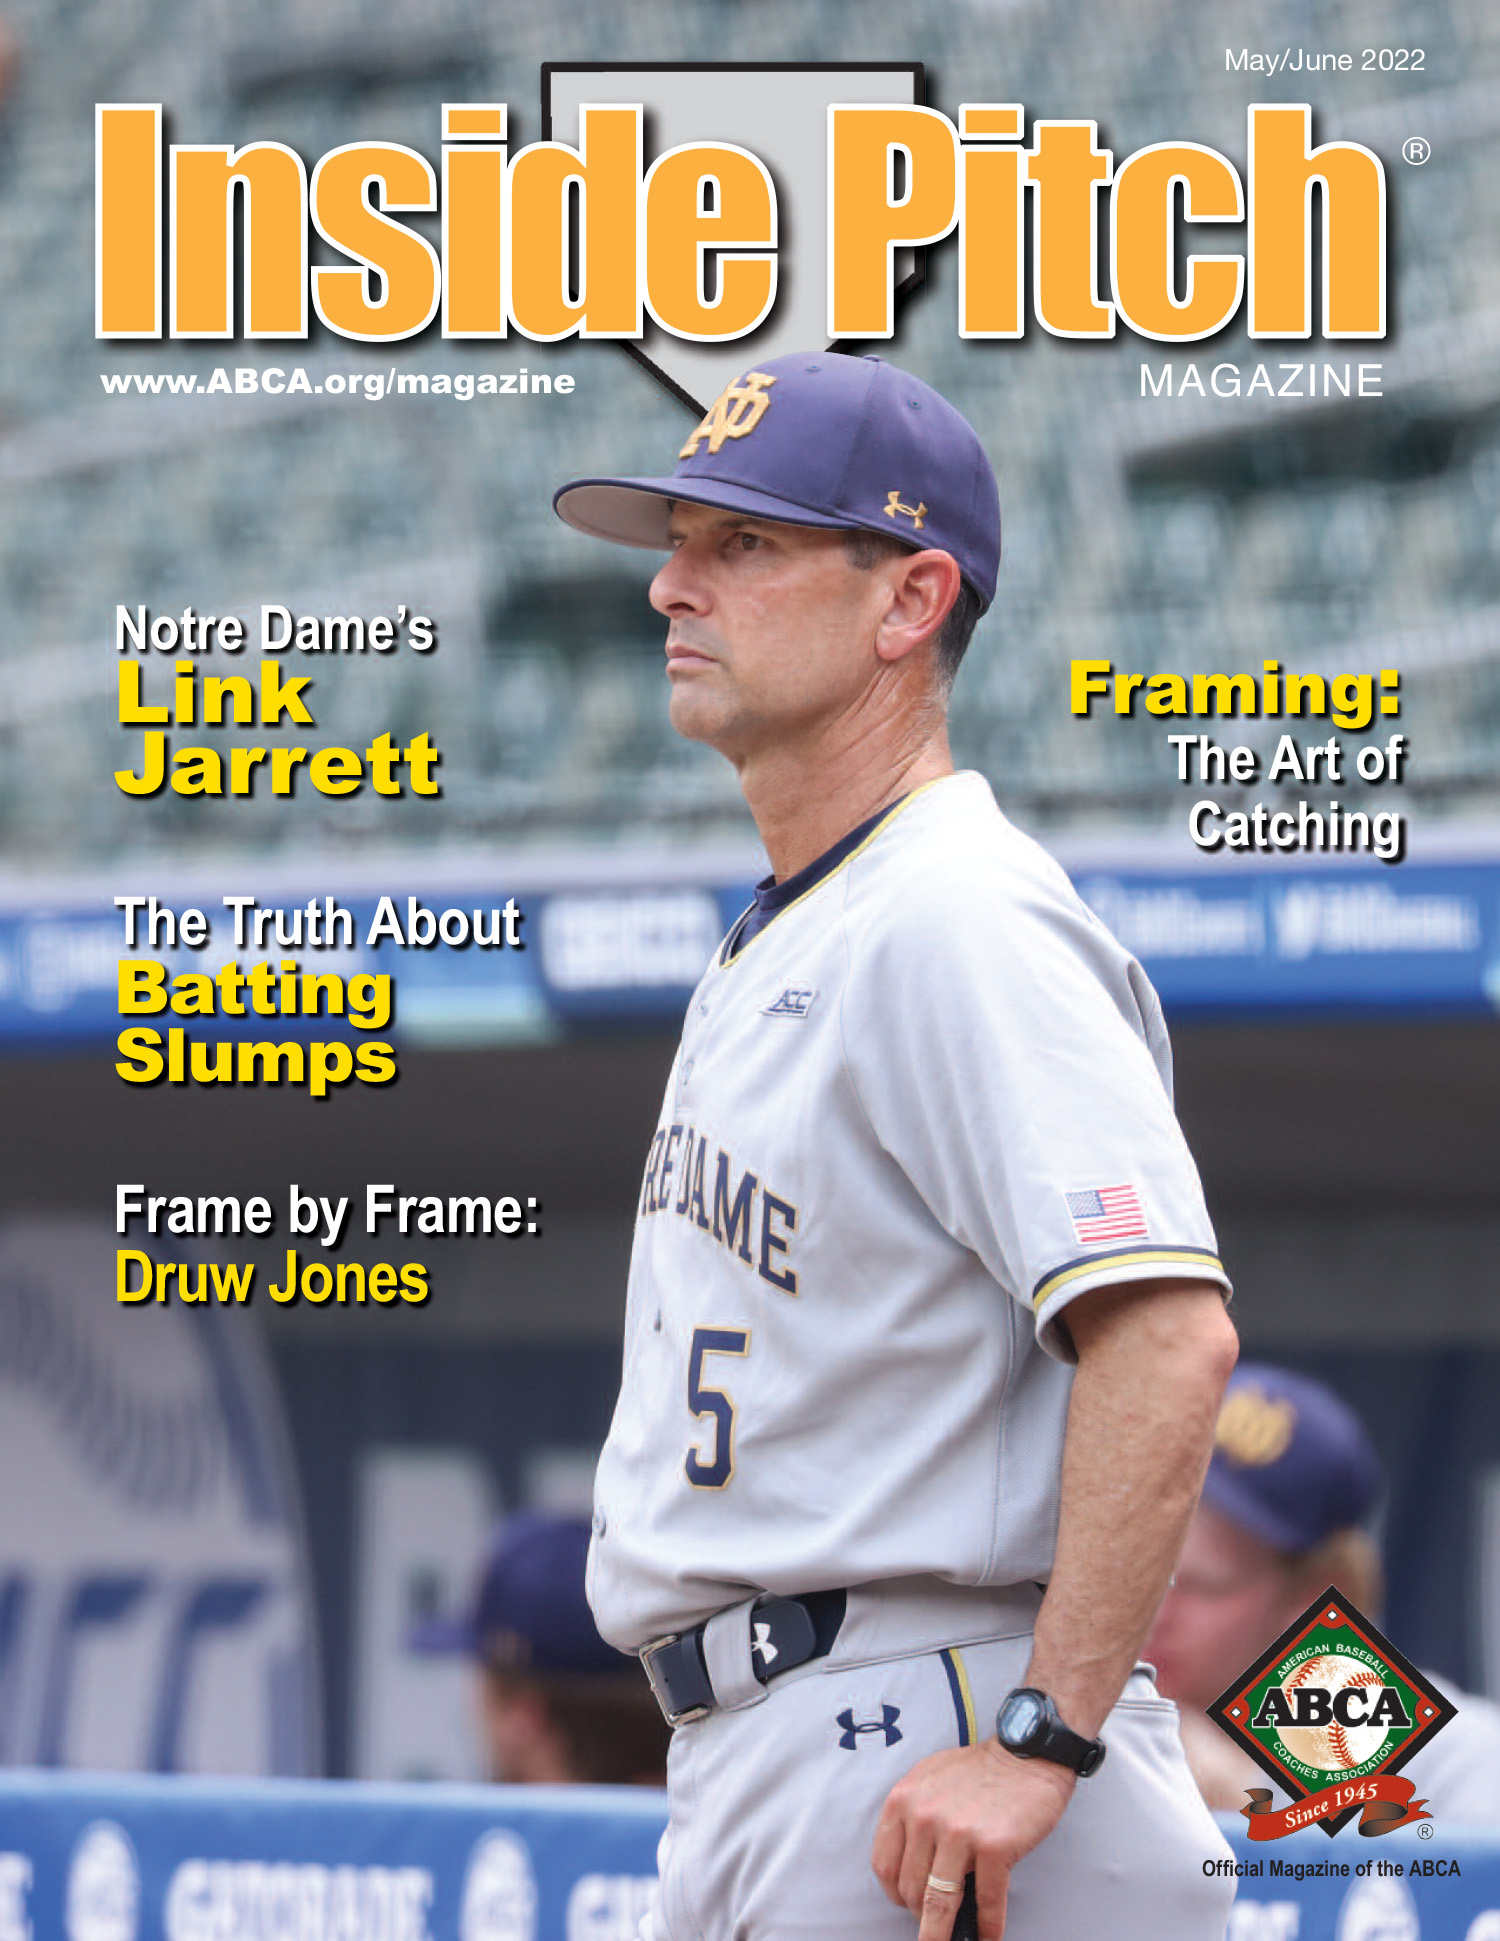 Inside Pitch Magazine Cover with Link Jarrett